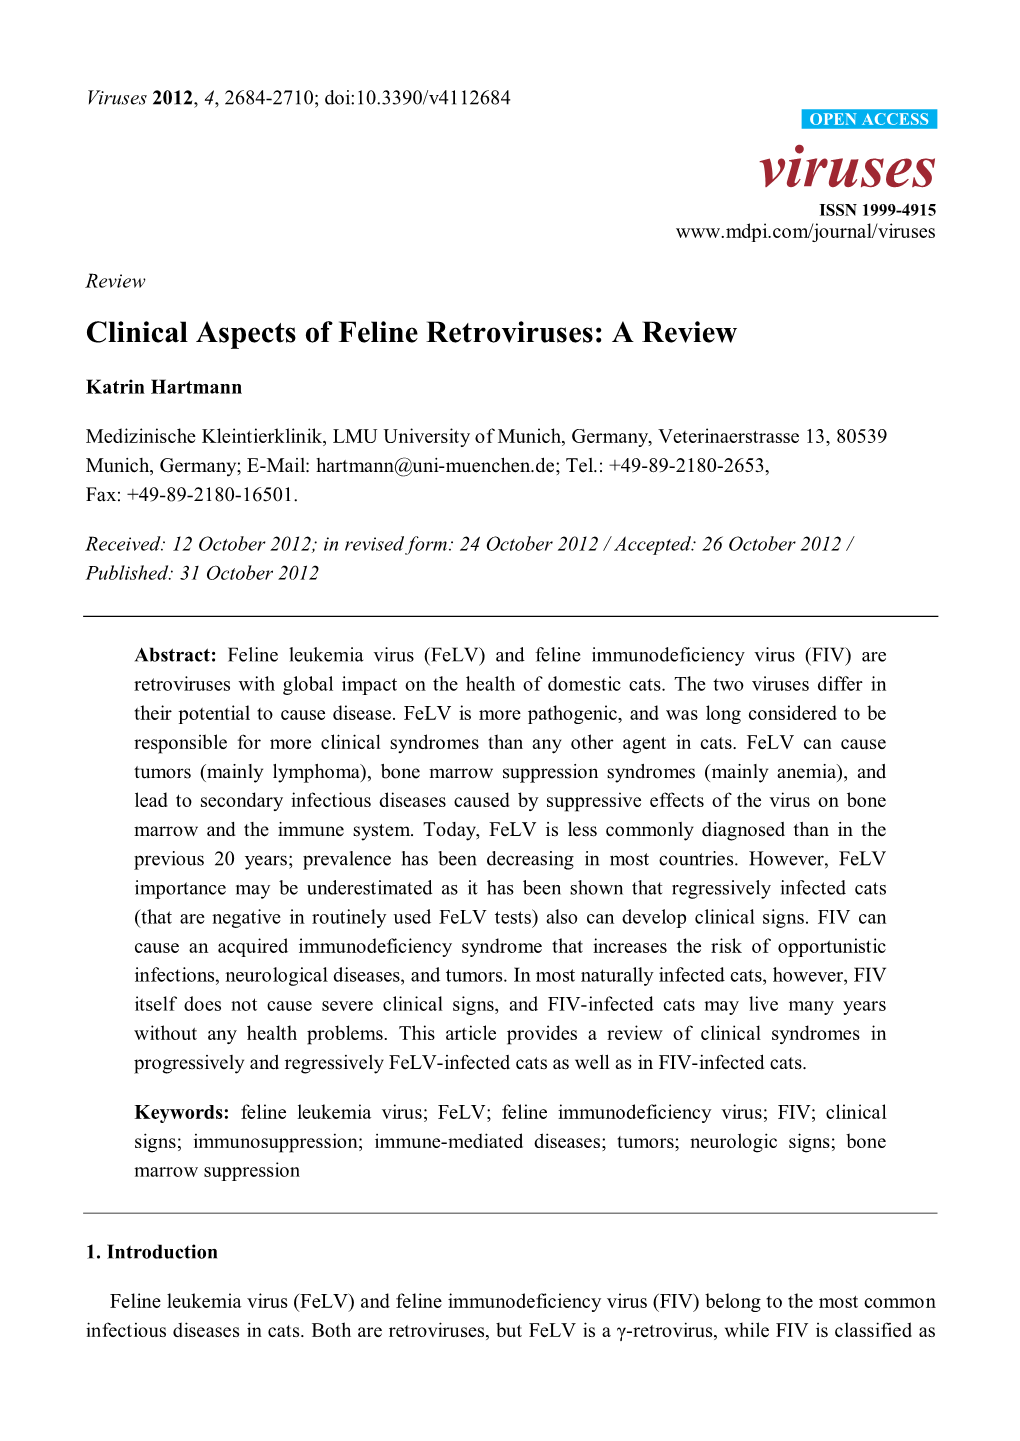 Clinical Aspects of Feline Retroviruses: a Review